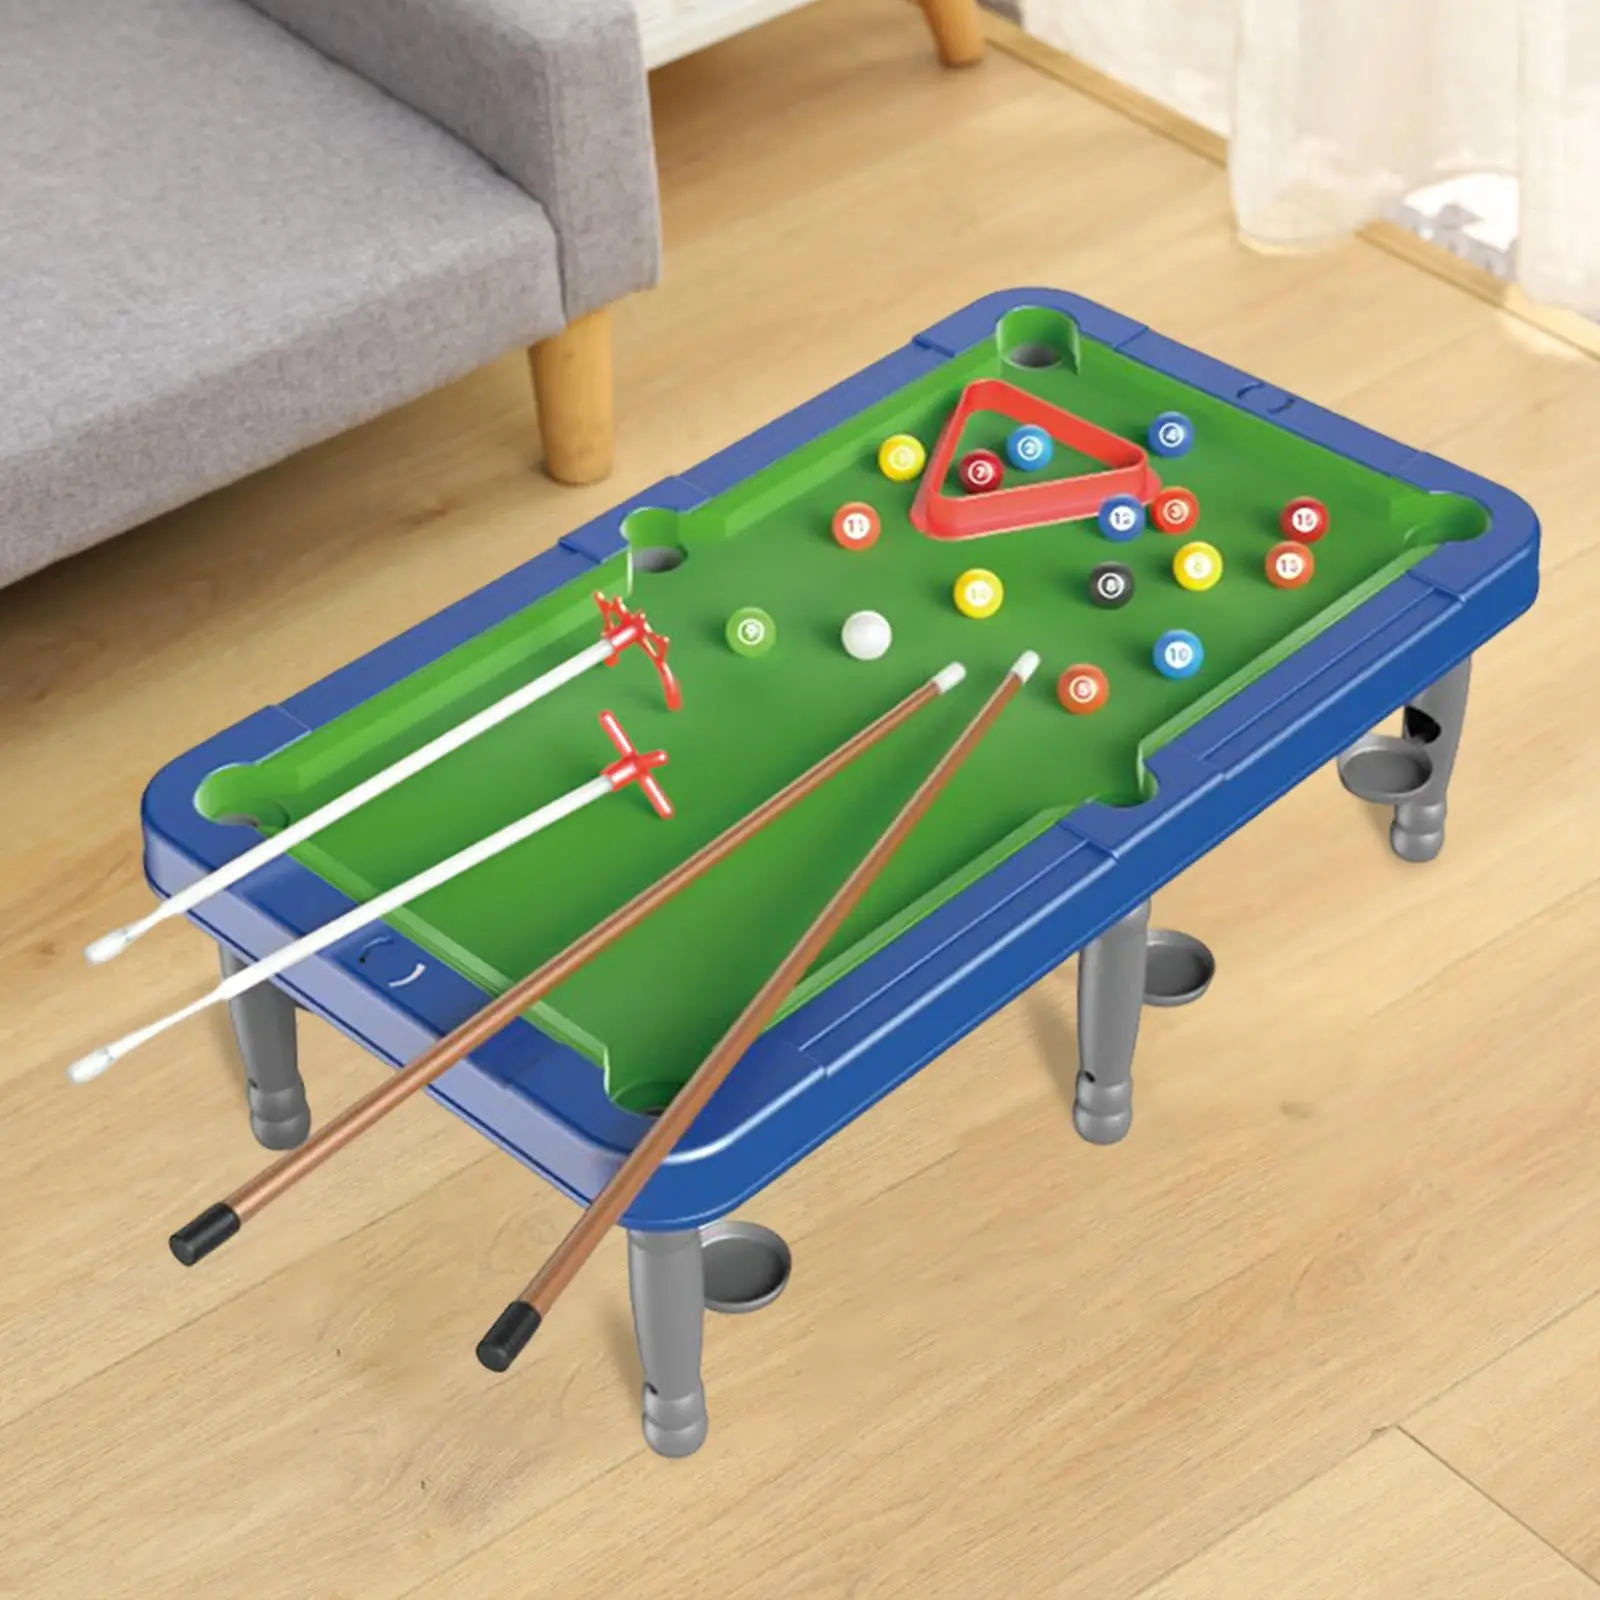 Durable Small Tabletop Billiards Office Use Chalk, Triangle Rack Interaction Toys Billiard Cues Pool Table Set for Adults Kids